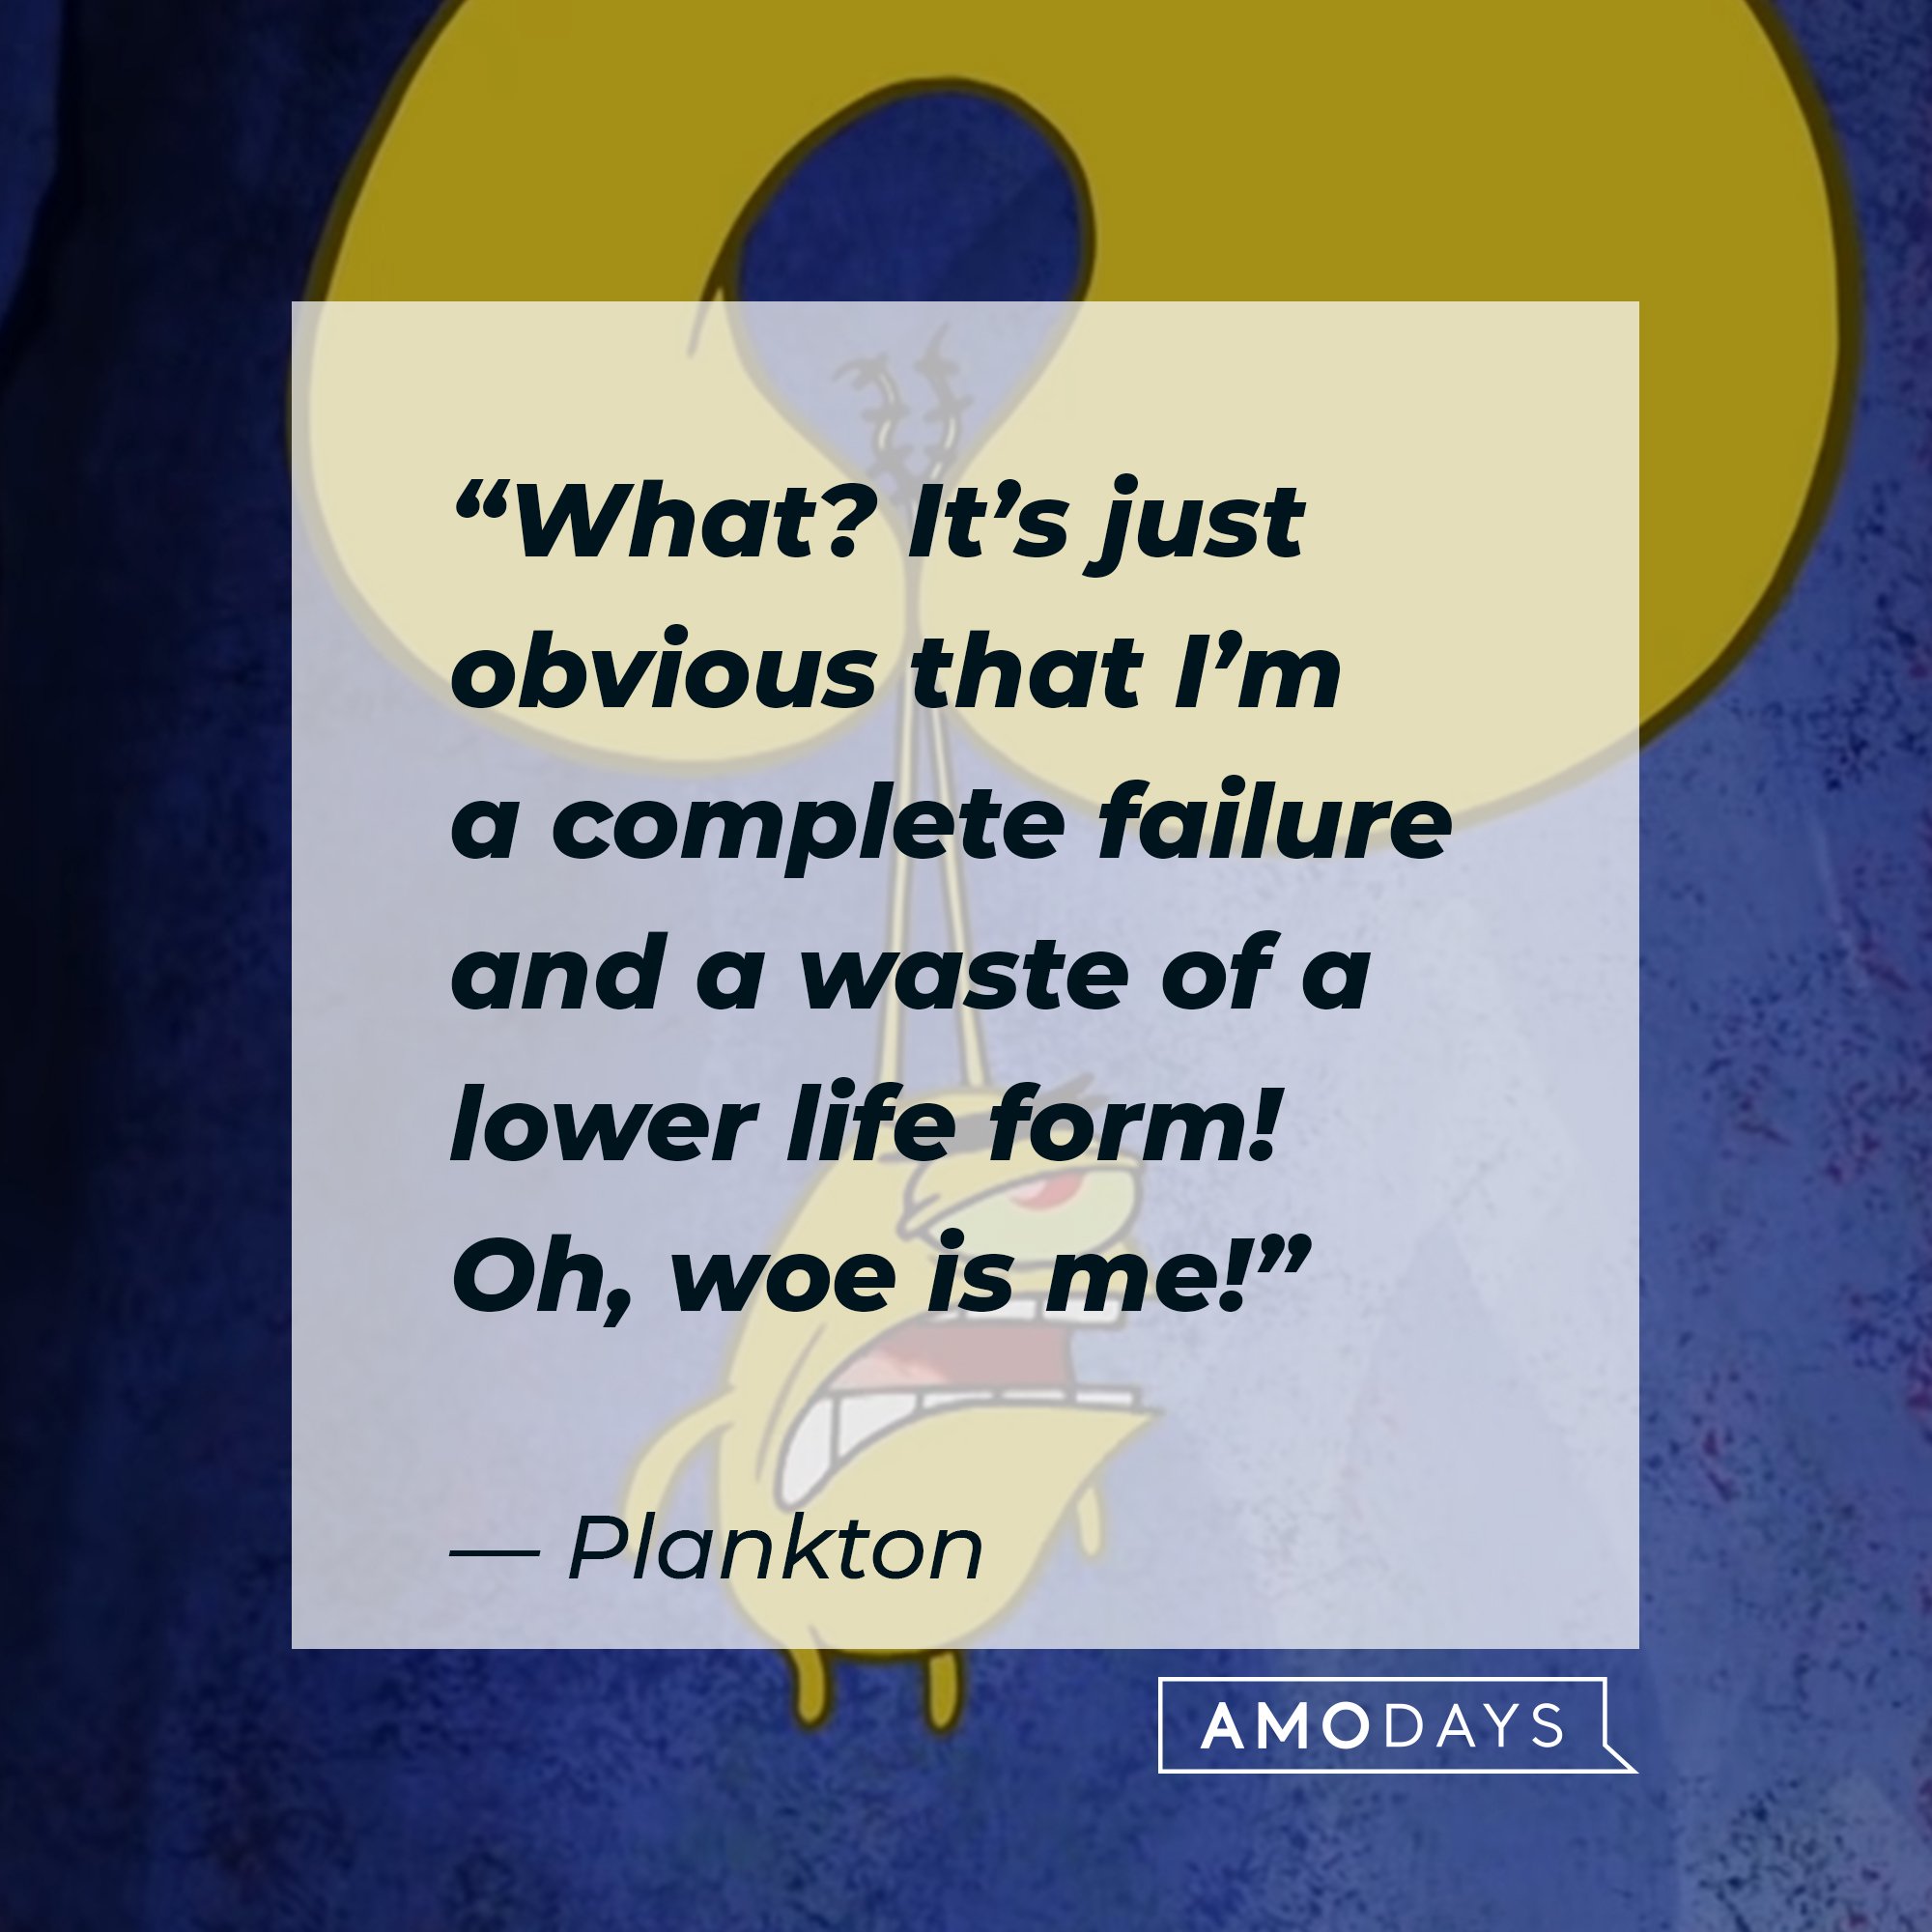 Plankton's quote: “What? It’s just obvious that I’m a complete failure and a waste of a lower life form! Oh, woe is me!” | Image: AmoDays